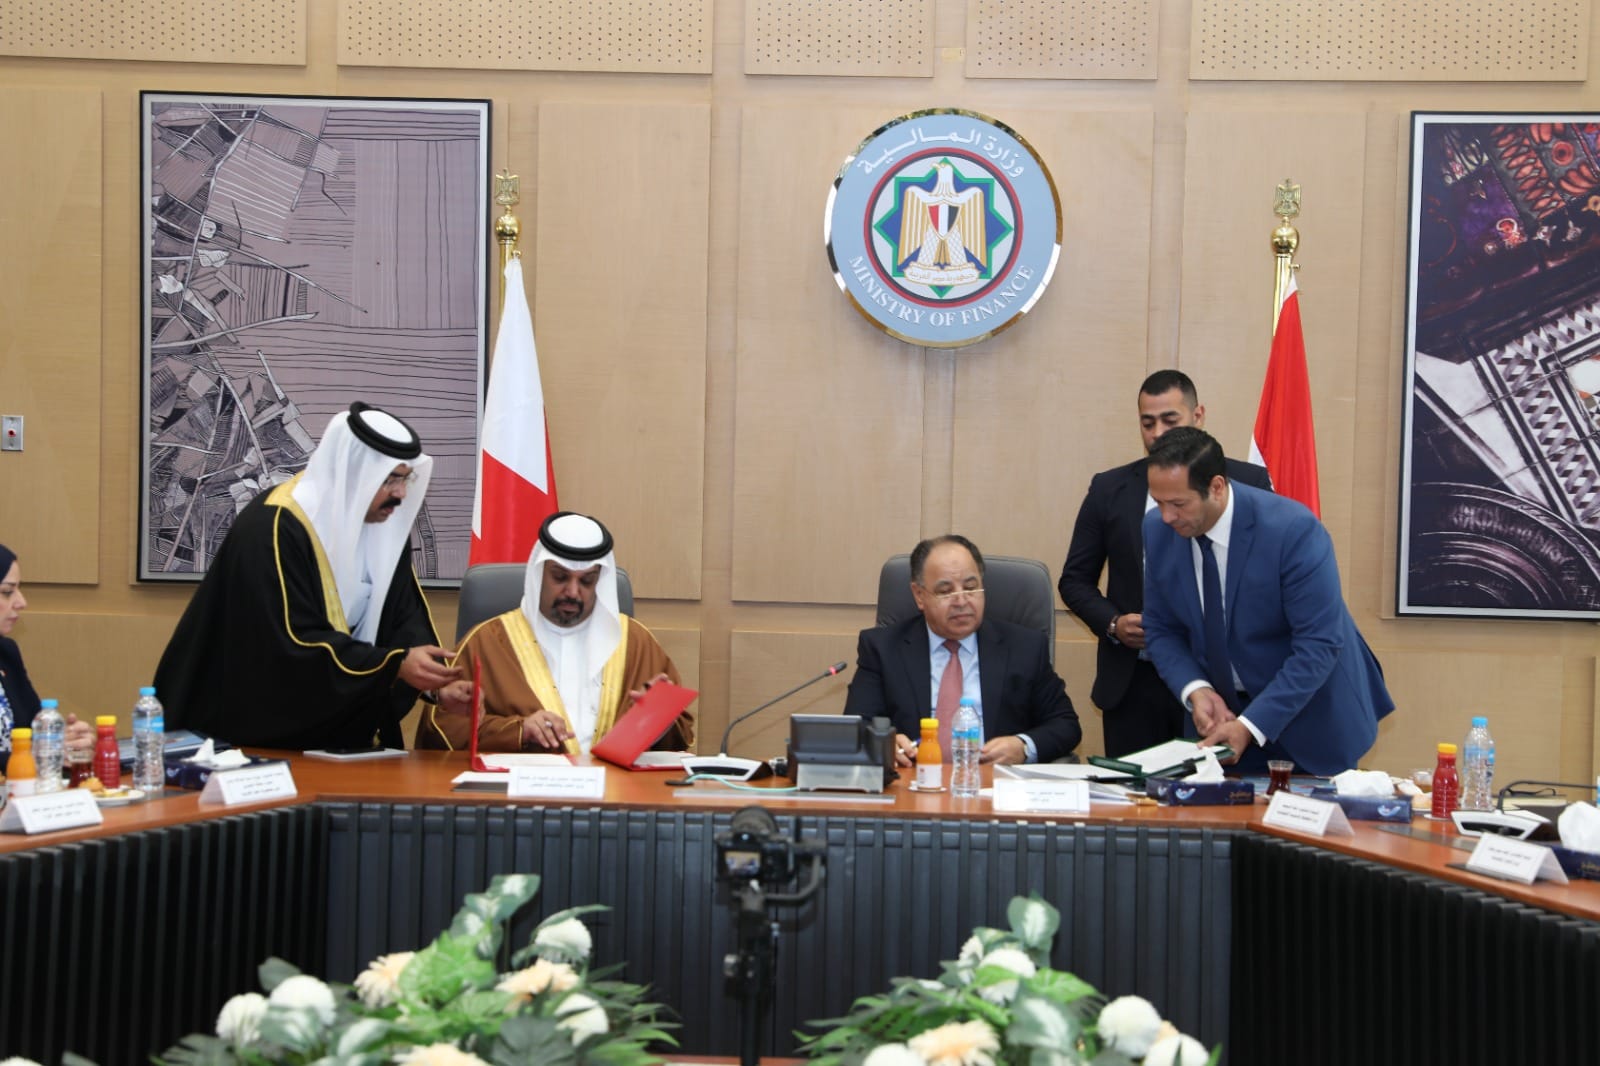 Egypt, Bahrain sign multiple agreements to boost cooperation